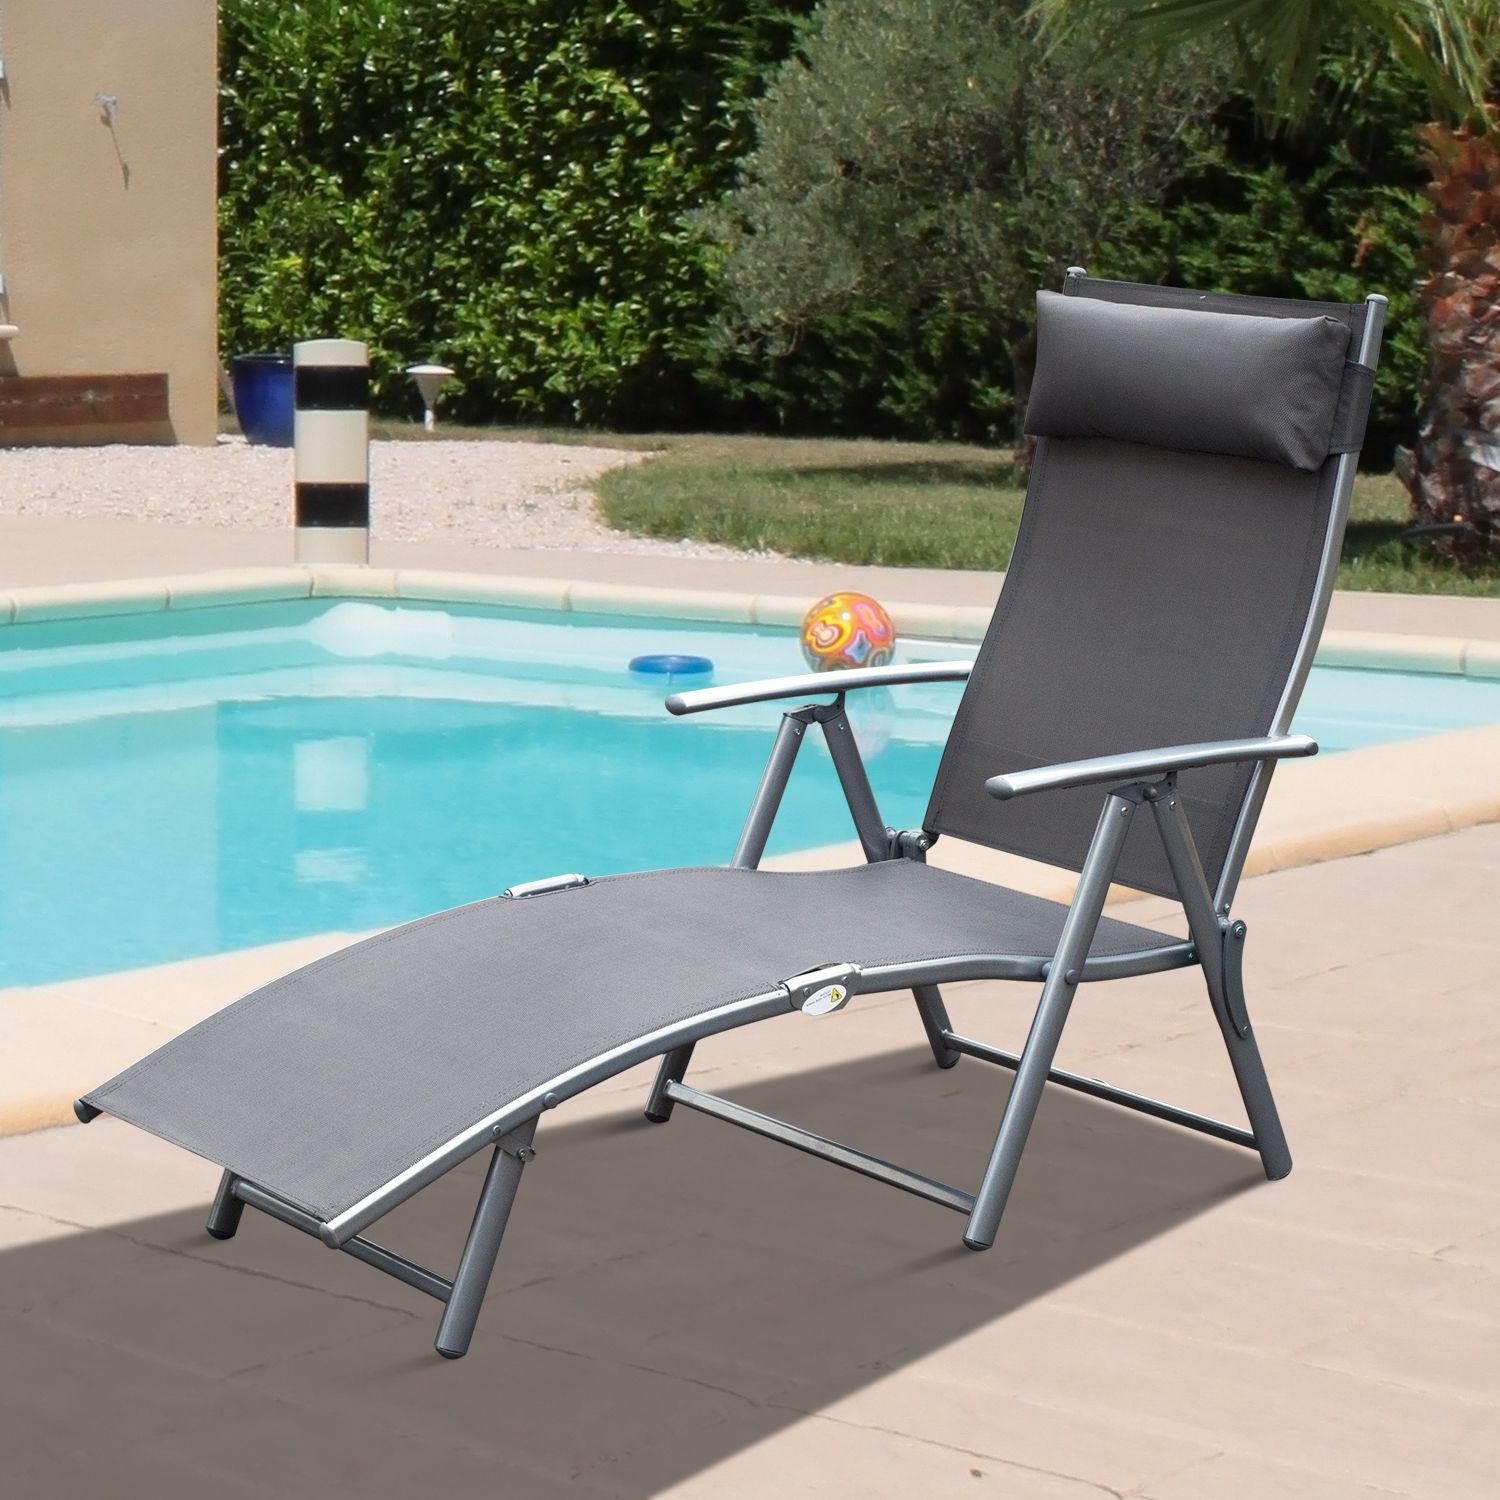 Adjustable Pool Chaise Lounge Chair Recliners With Regard To Favorite Chaise Lounge Chair Folding Pool Beach Yard Adjustable Patio (View 11 of 15)